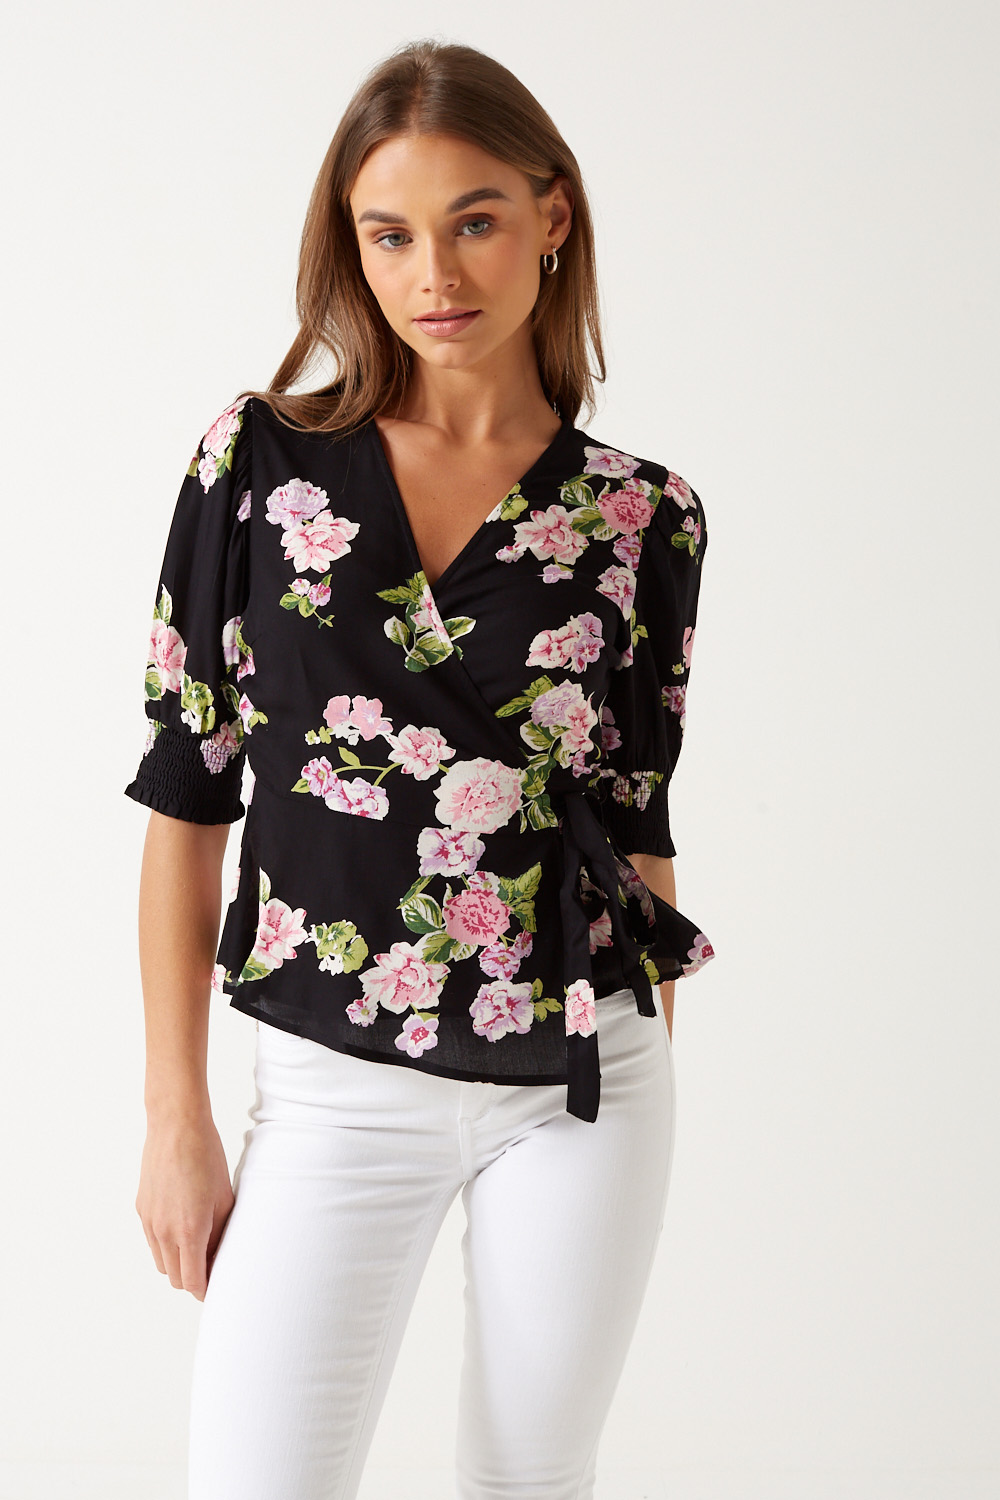 Pieces Tala Floral Print Wrap Top in Black | iCLOTHING - iCLOTHING